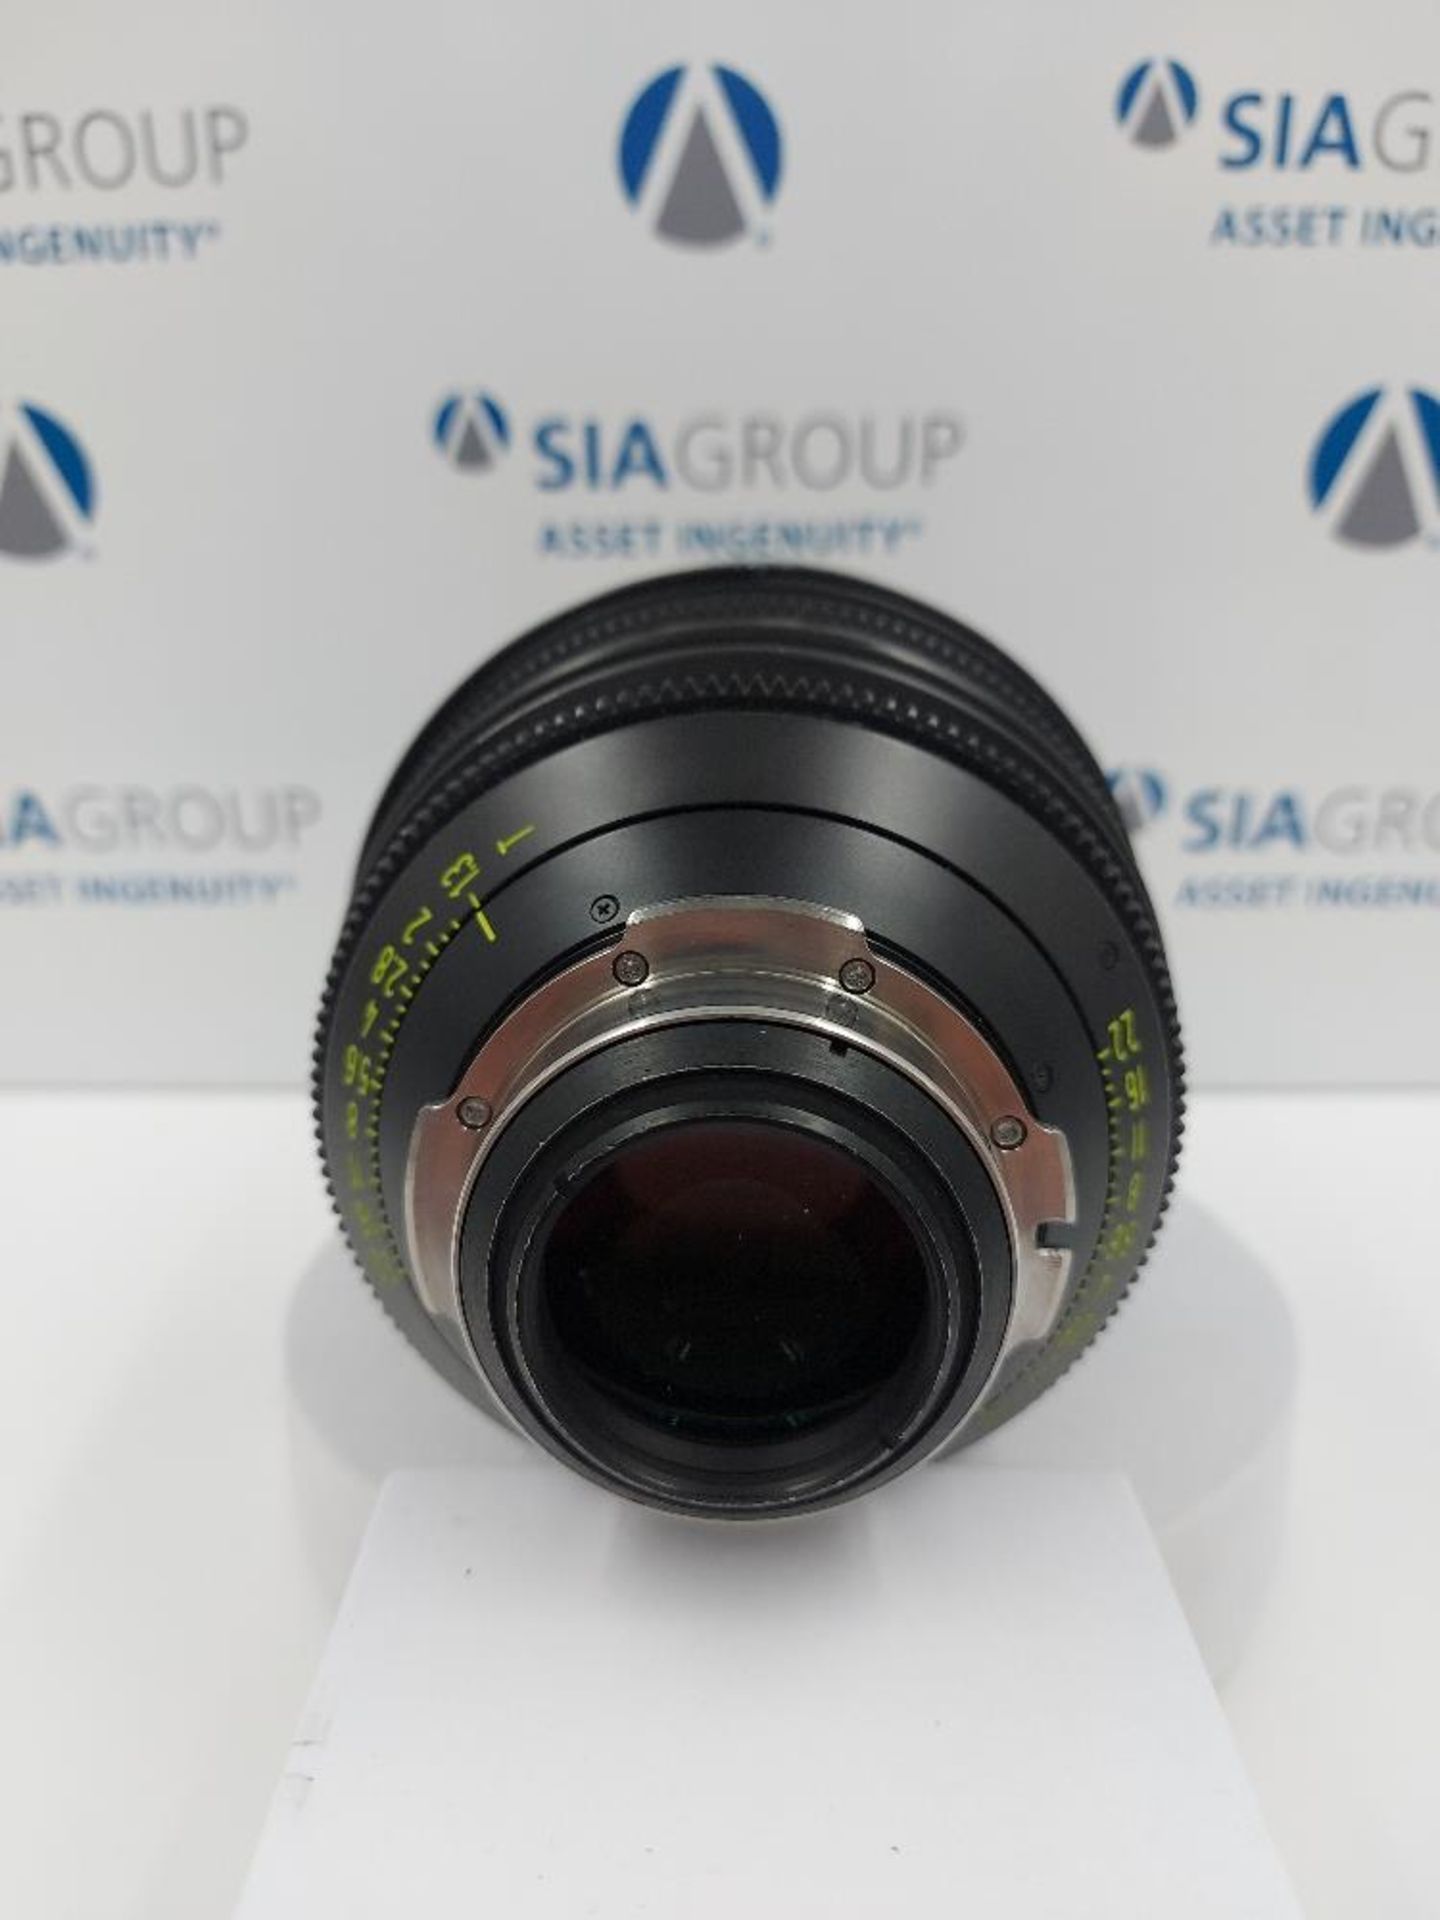 Zeiss ARRI Master Prime 40mm T1.3 Lens with PL Mount - Image 6 of 6